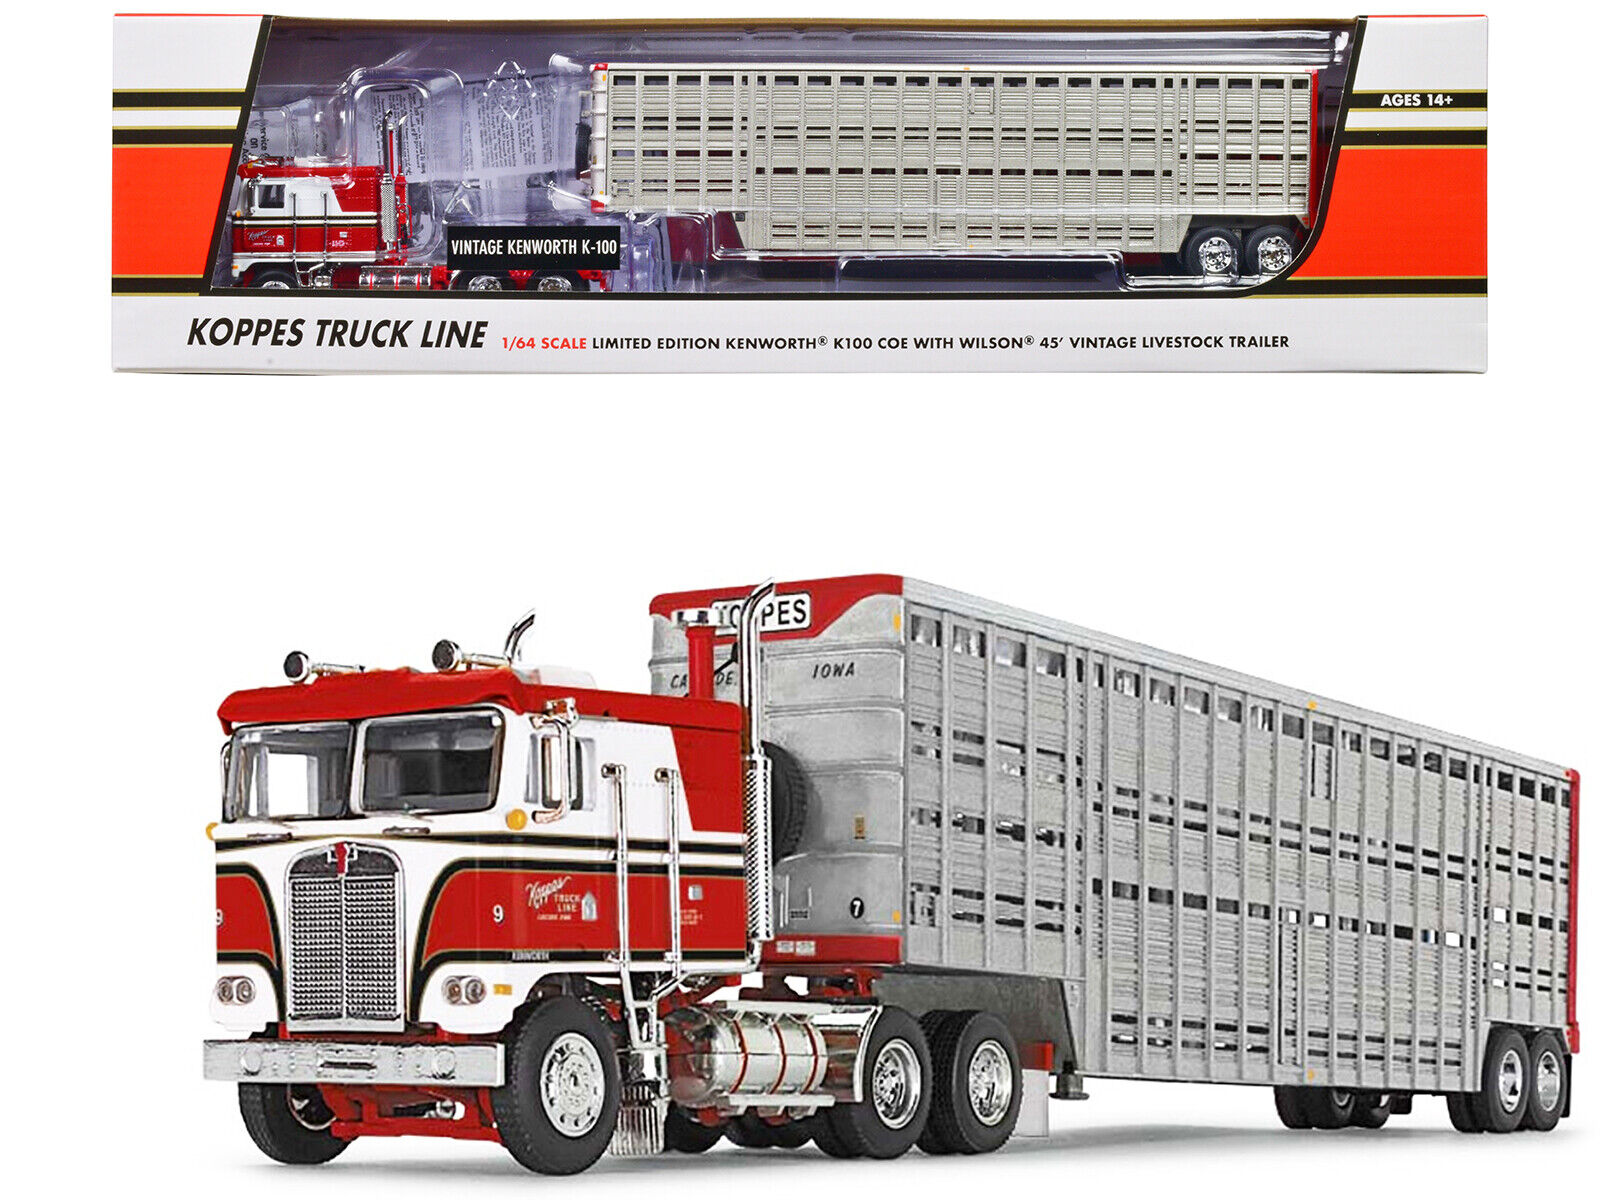 Kenworth K100 COE Red and White with 45' Wilson Vintage Livestock Trailer